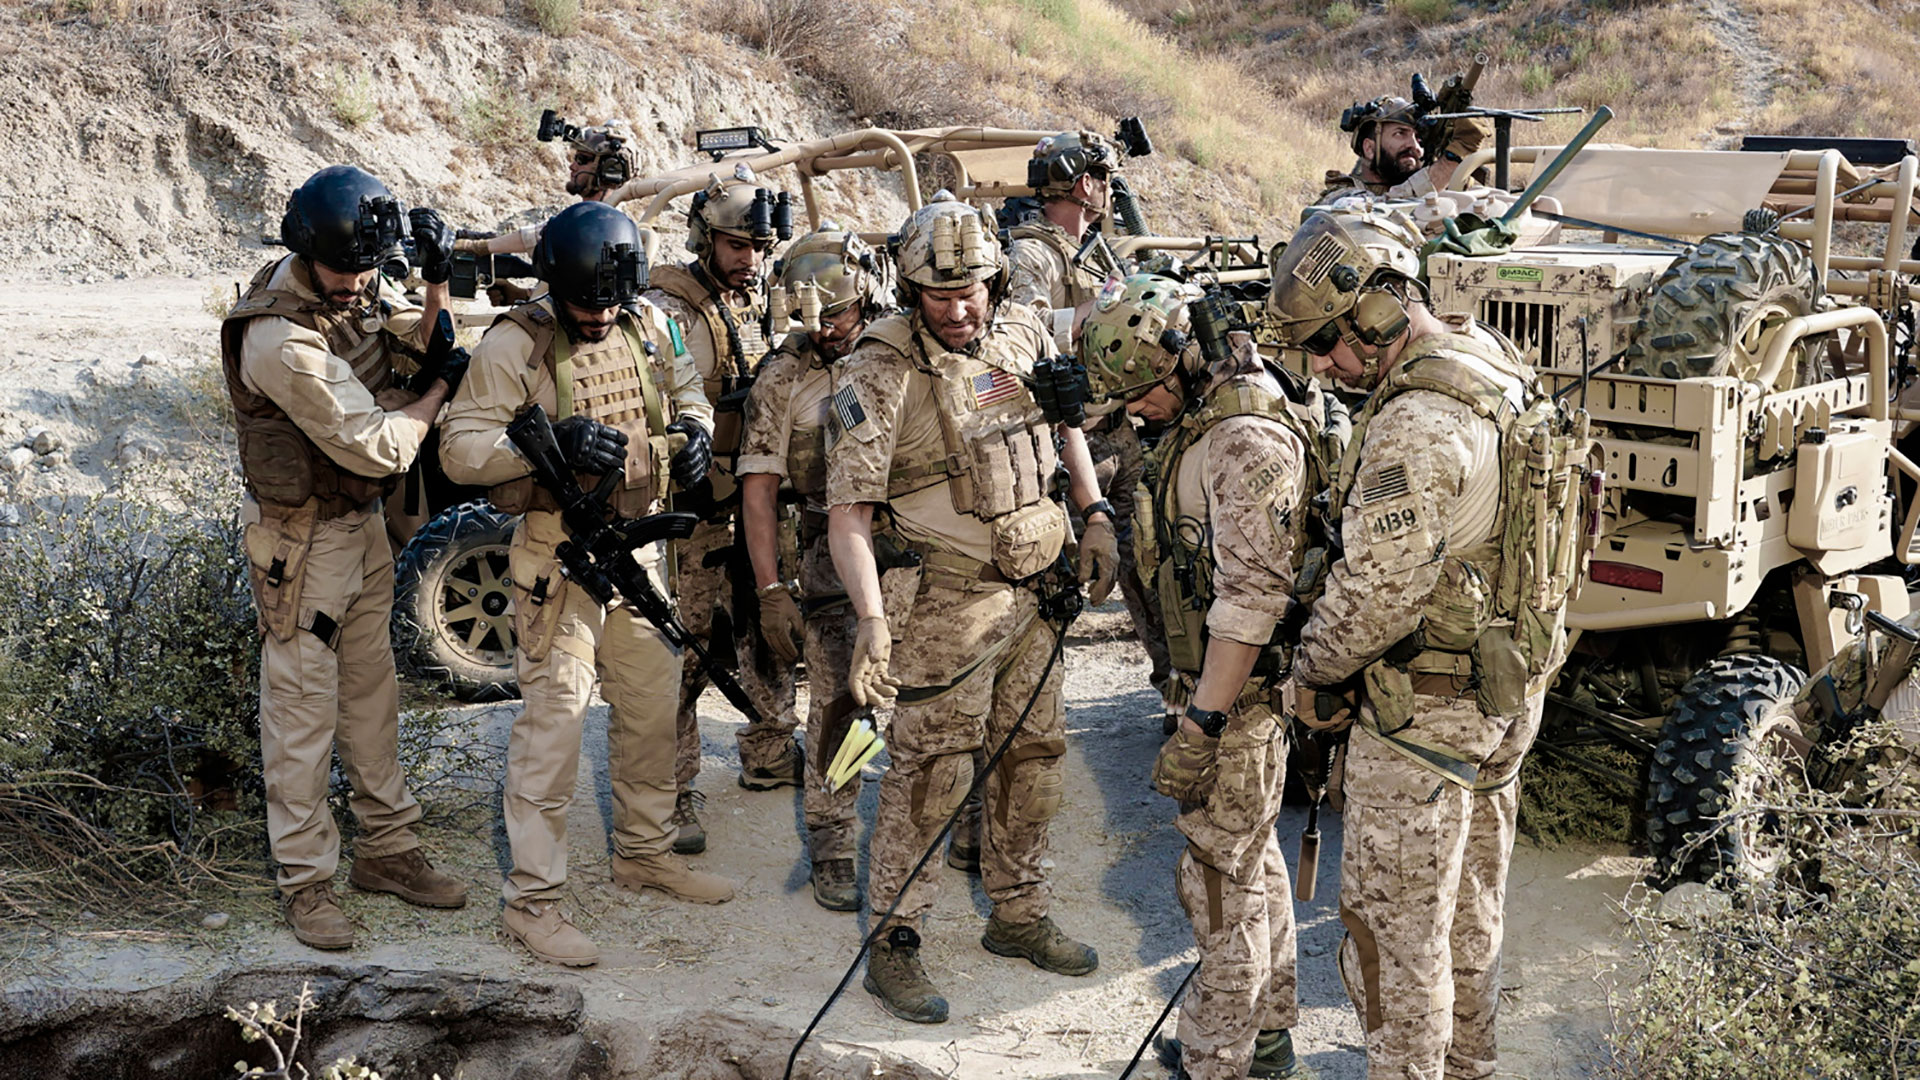 Get To Know The Heroic Characters Of SEAL Team